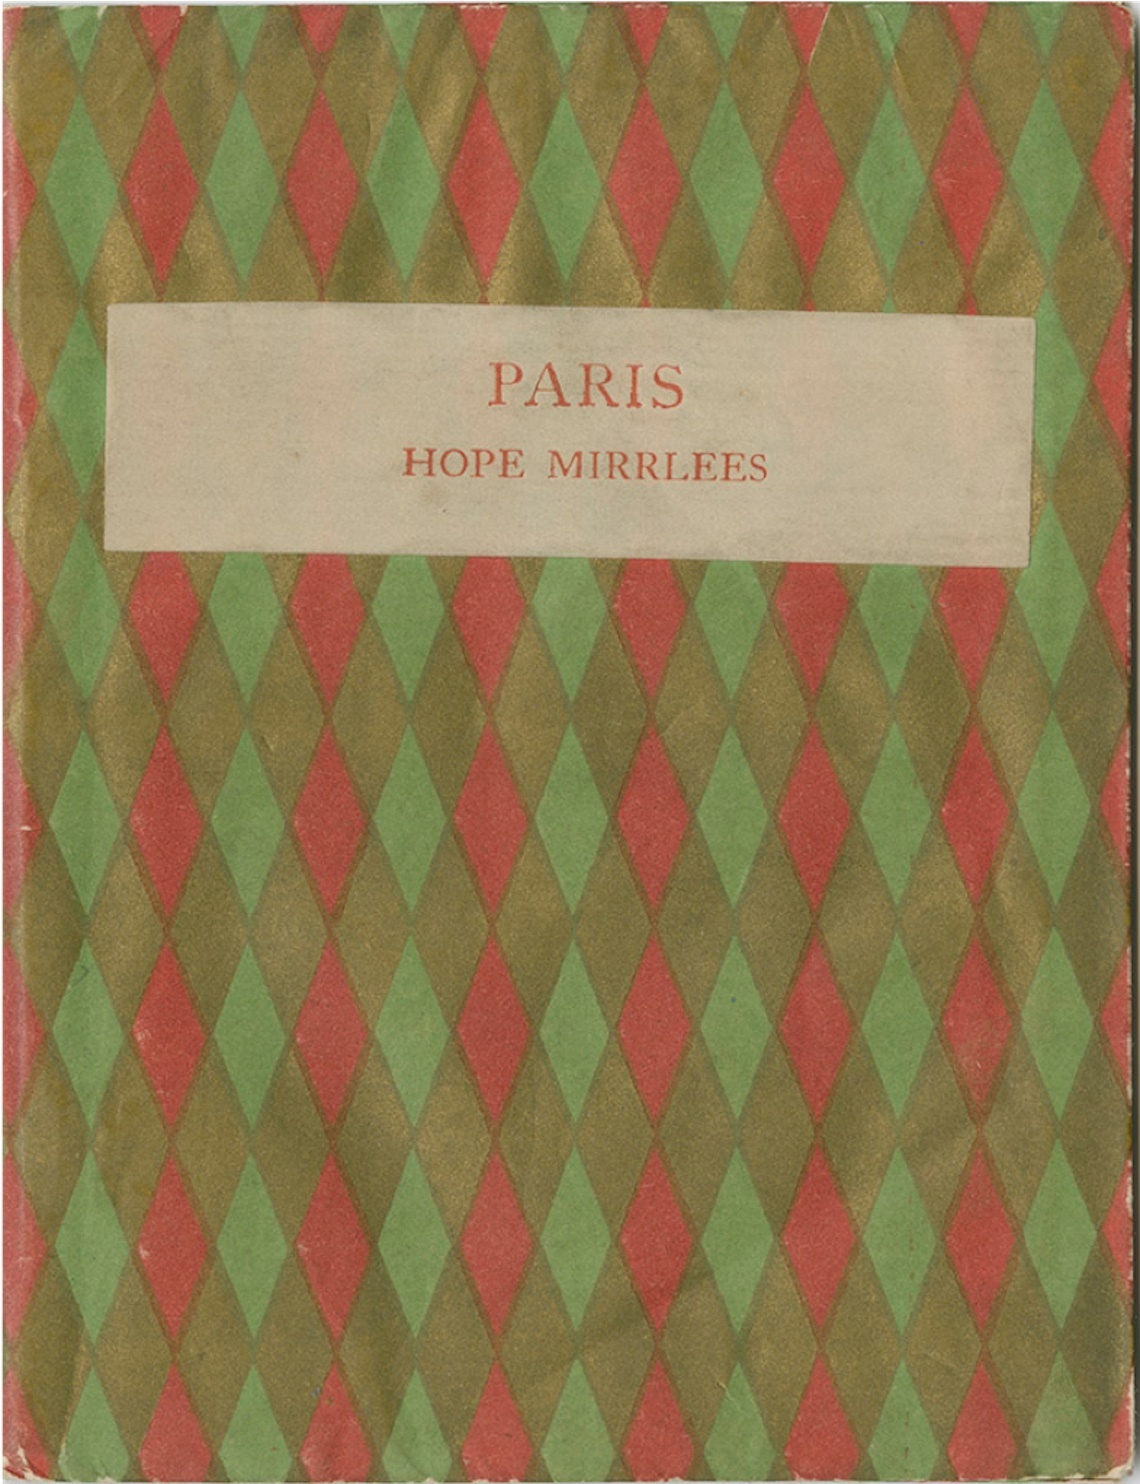 Scan of the front cover of Paris